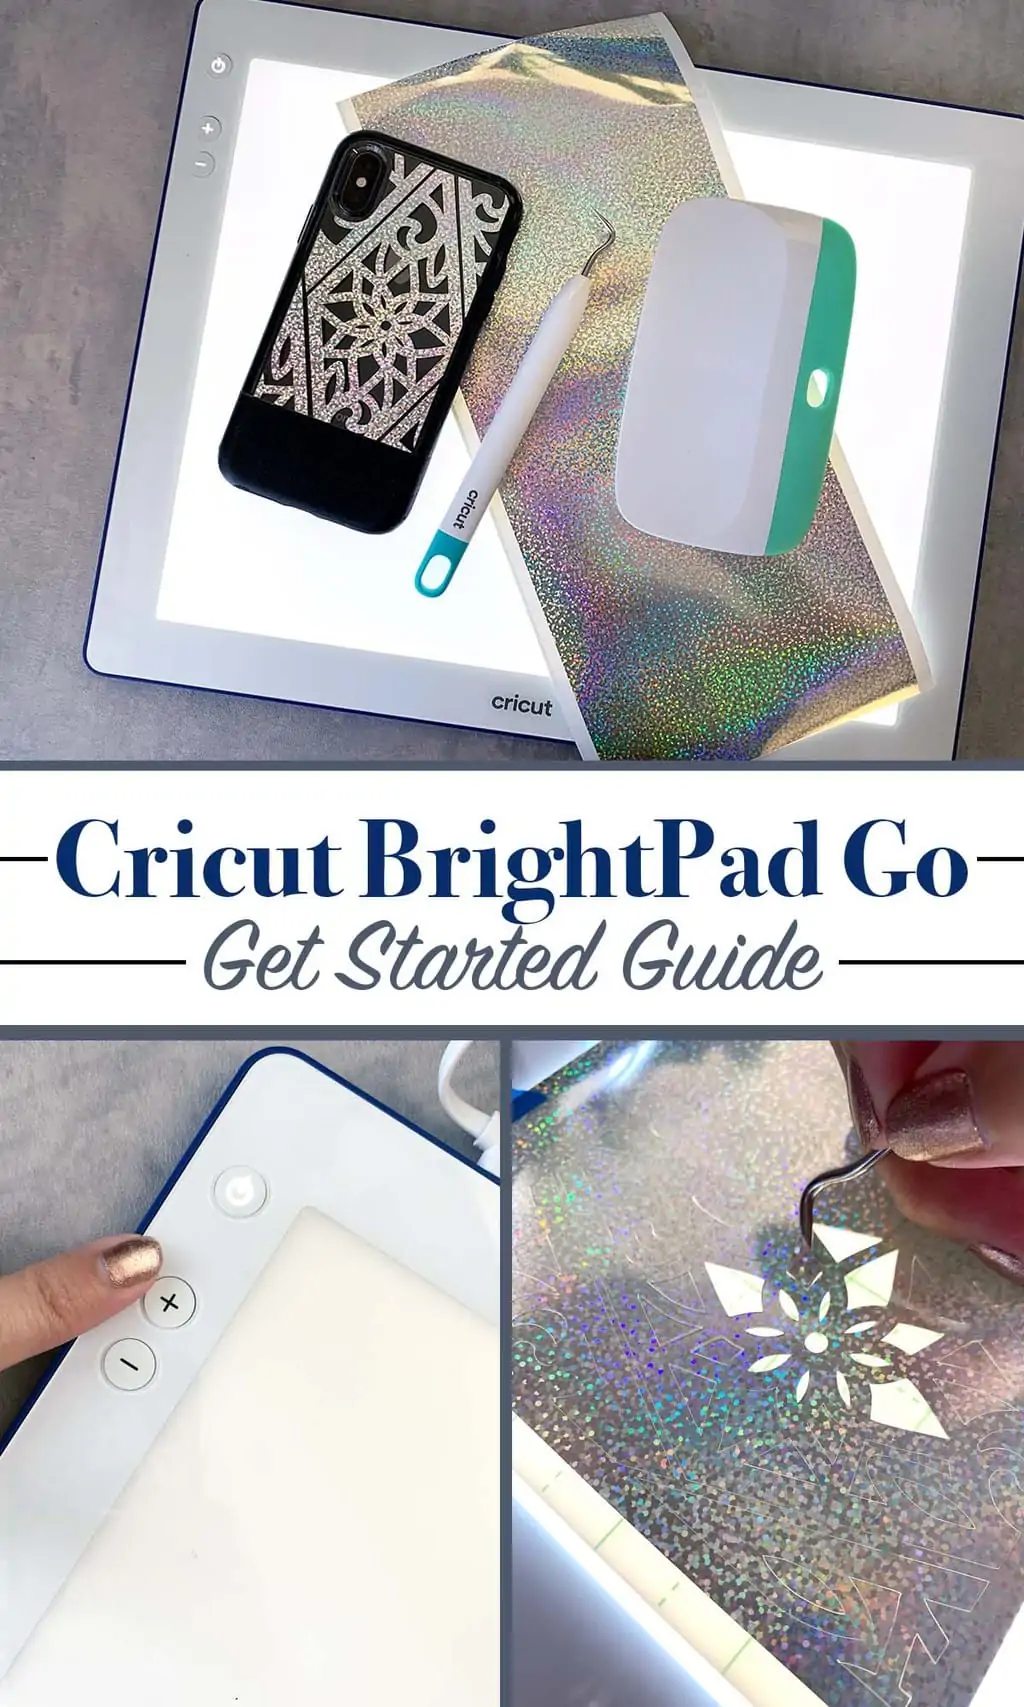 Cricut BrightPad Get Started Guide - 100 Directions